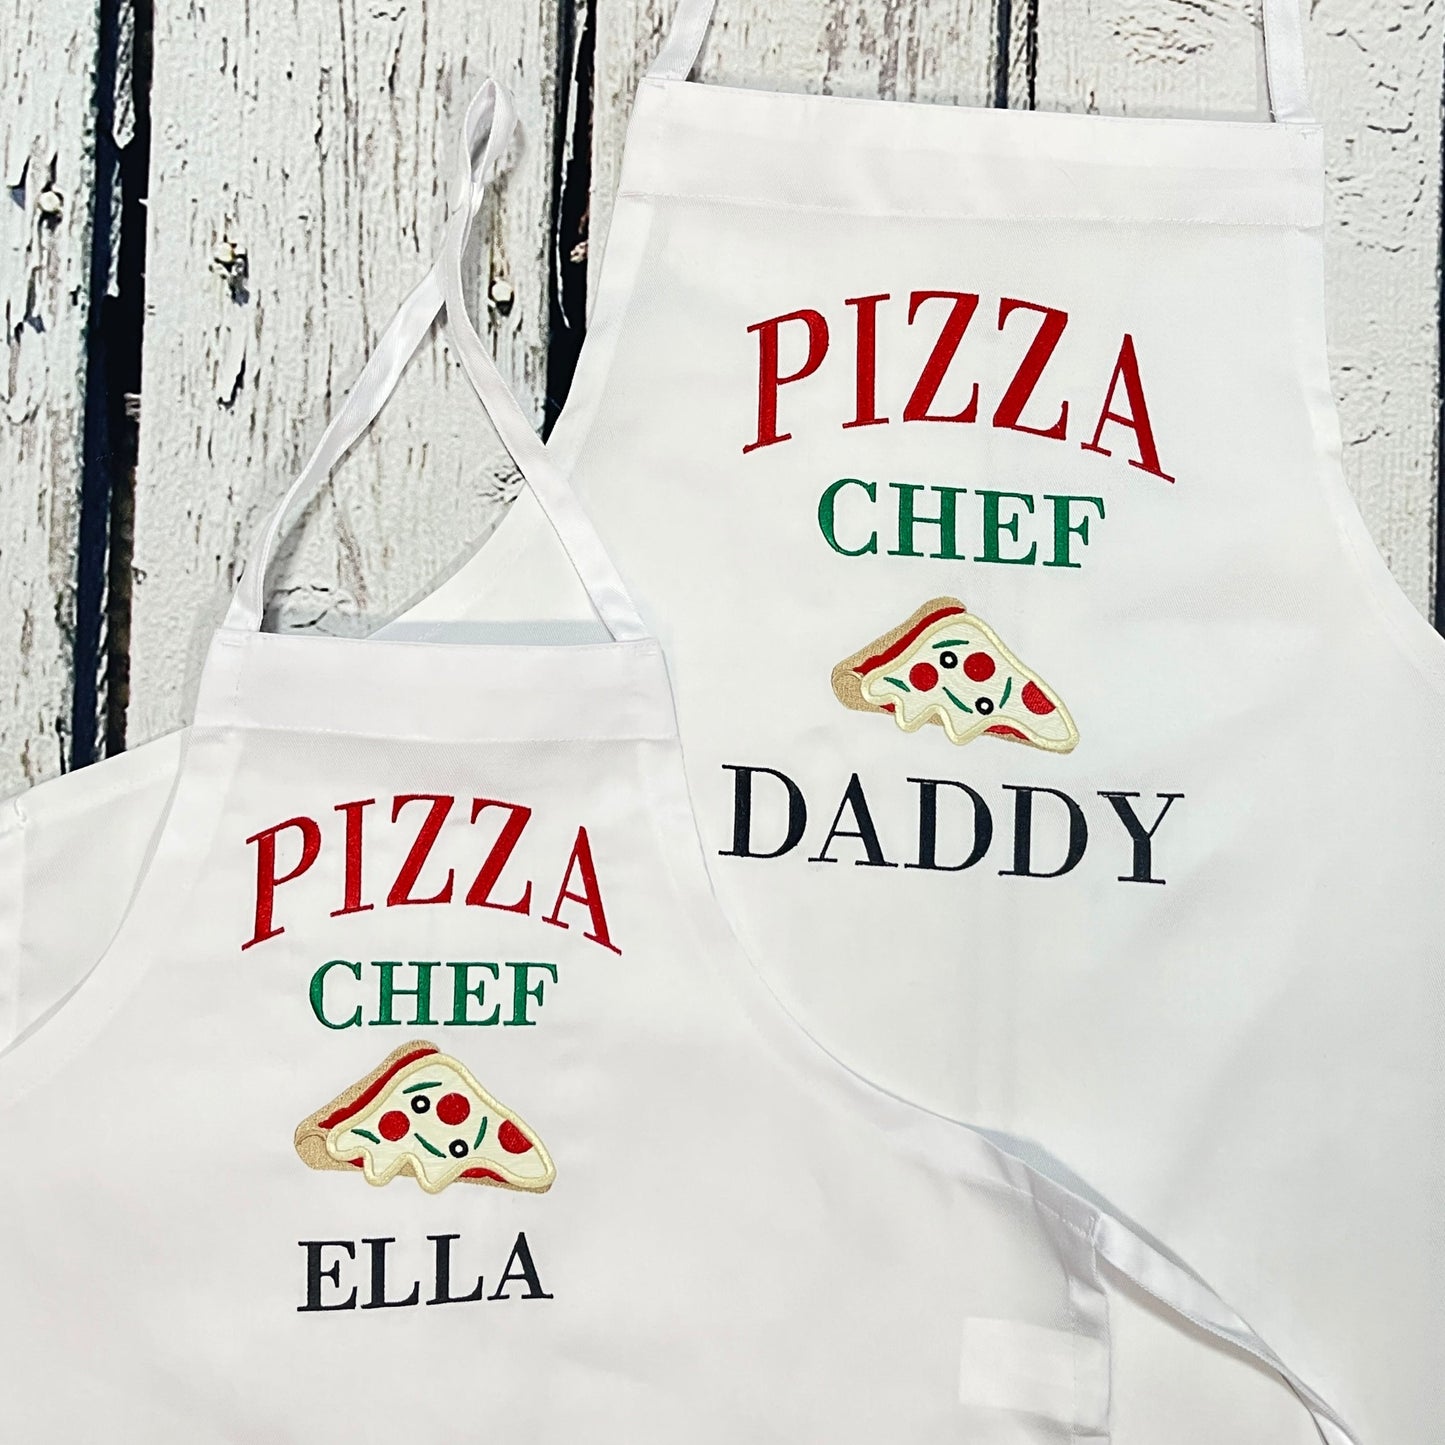 Pizza chef adult child apron set with names